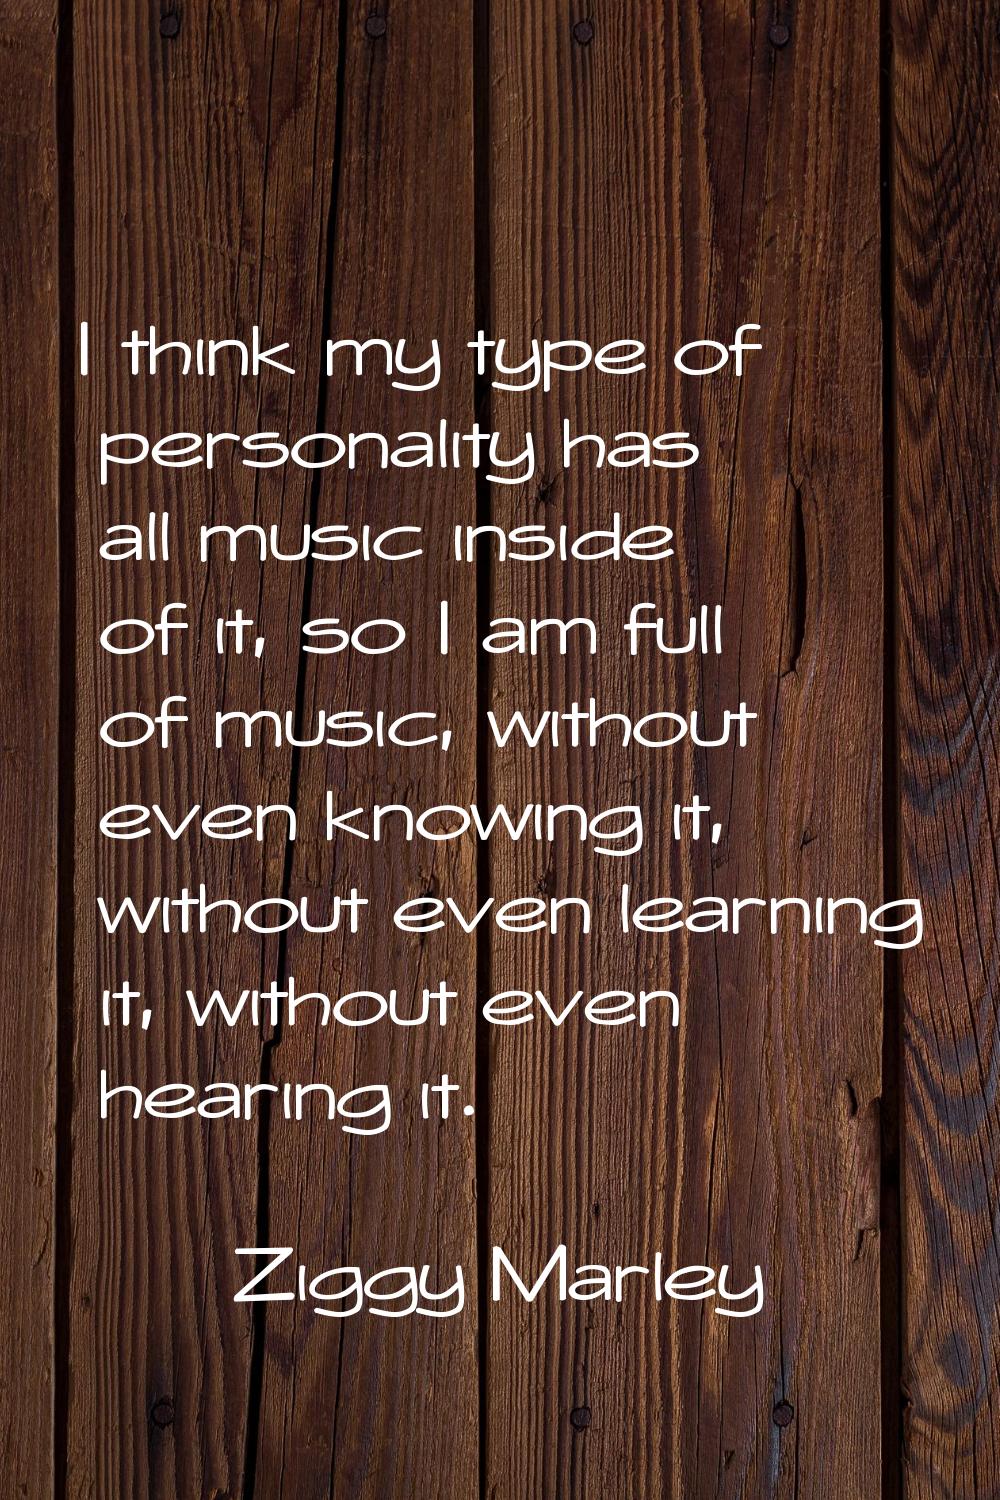 I think my type of personality has all music inside of it, so I am full of music, without even know